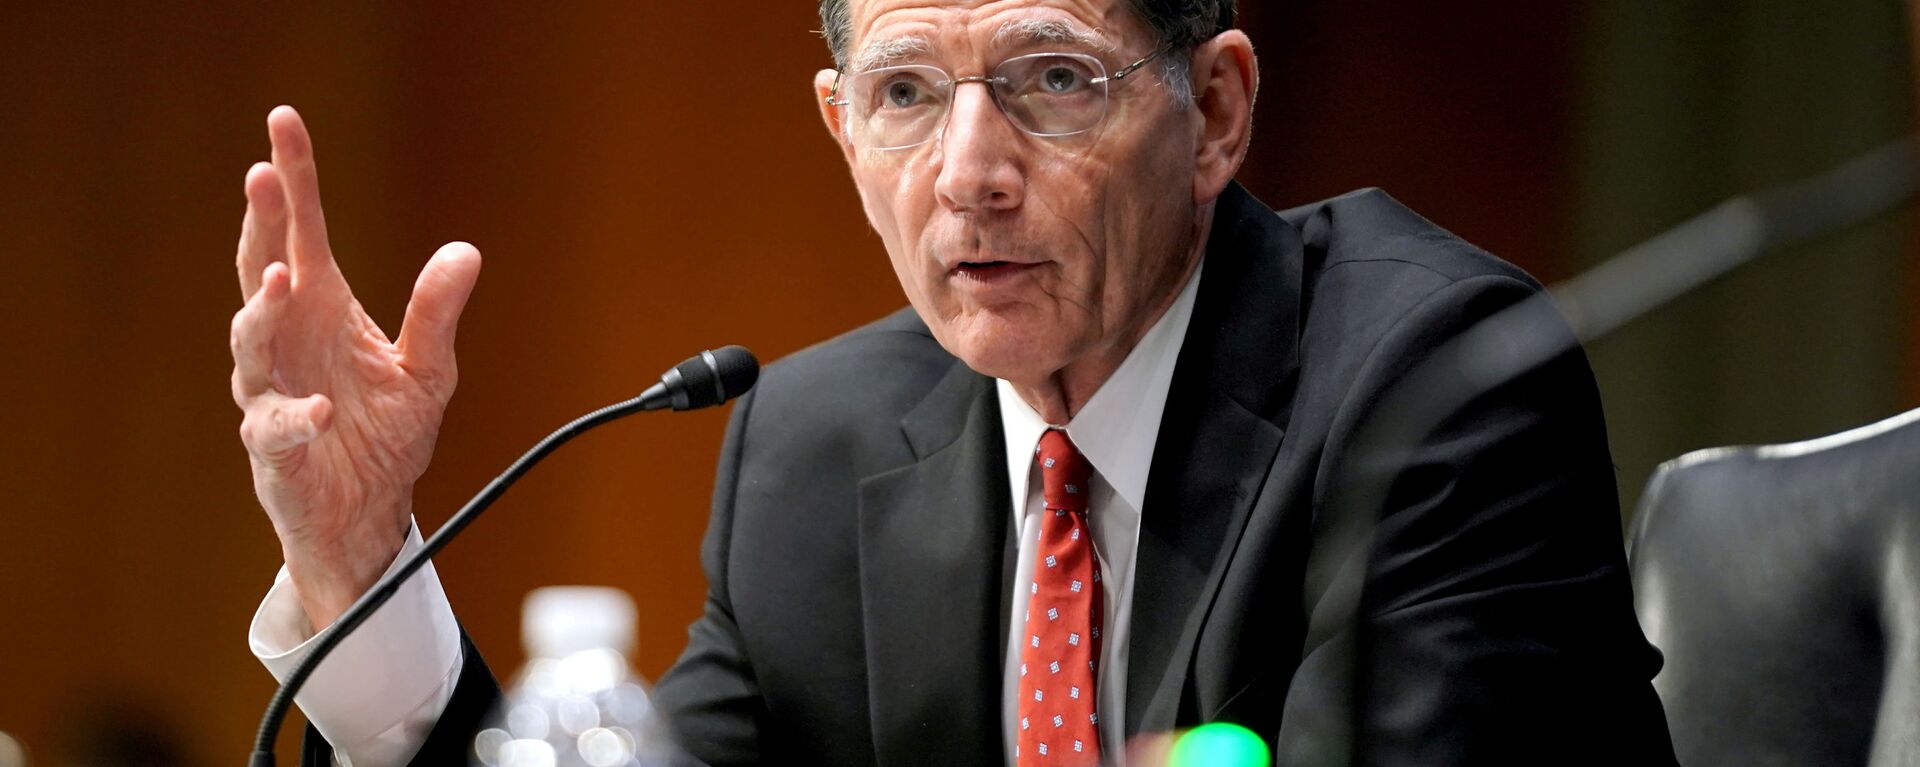 Sen. John Barrasso (R-Wyo.) questions    former U.S. Ambassador to the United Nations Samantha Power, who is President Joe Biden's choice to lead the U.S. Agency for International Development, at a confirmation hearing before the Senate Foreign Relations Committee in Washington, DC, U.S., March 23, 2021.  - Sputnik International, 1920, 29.11.2021